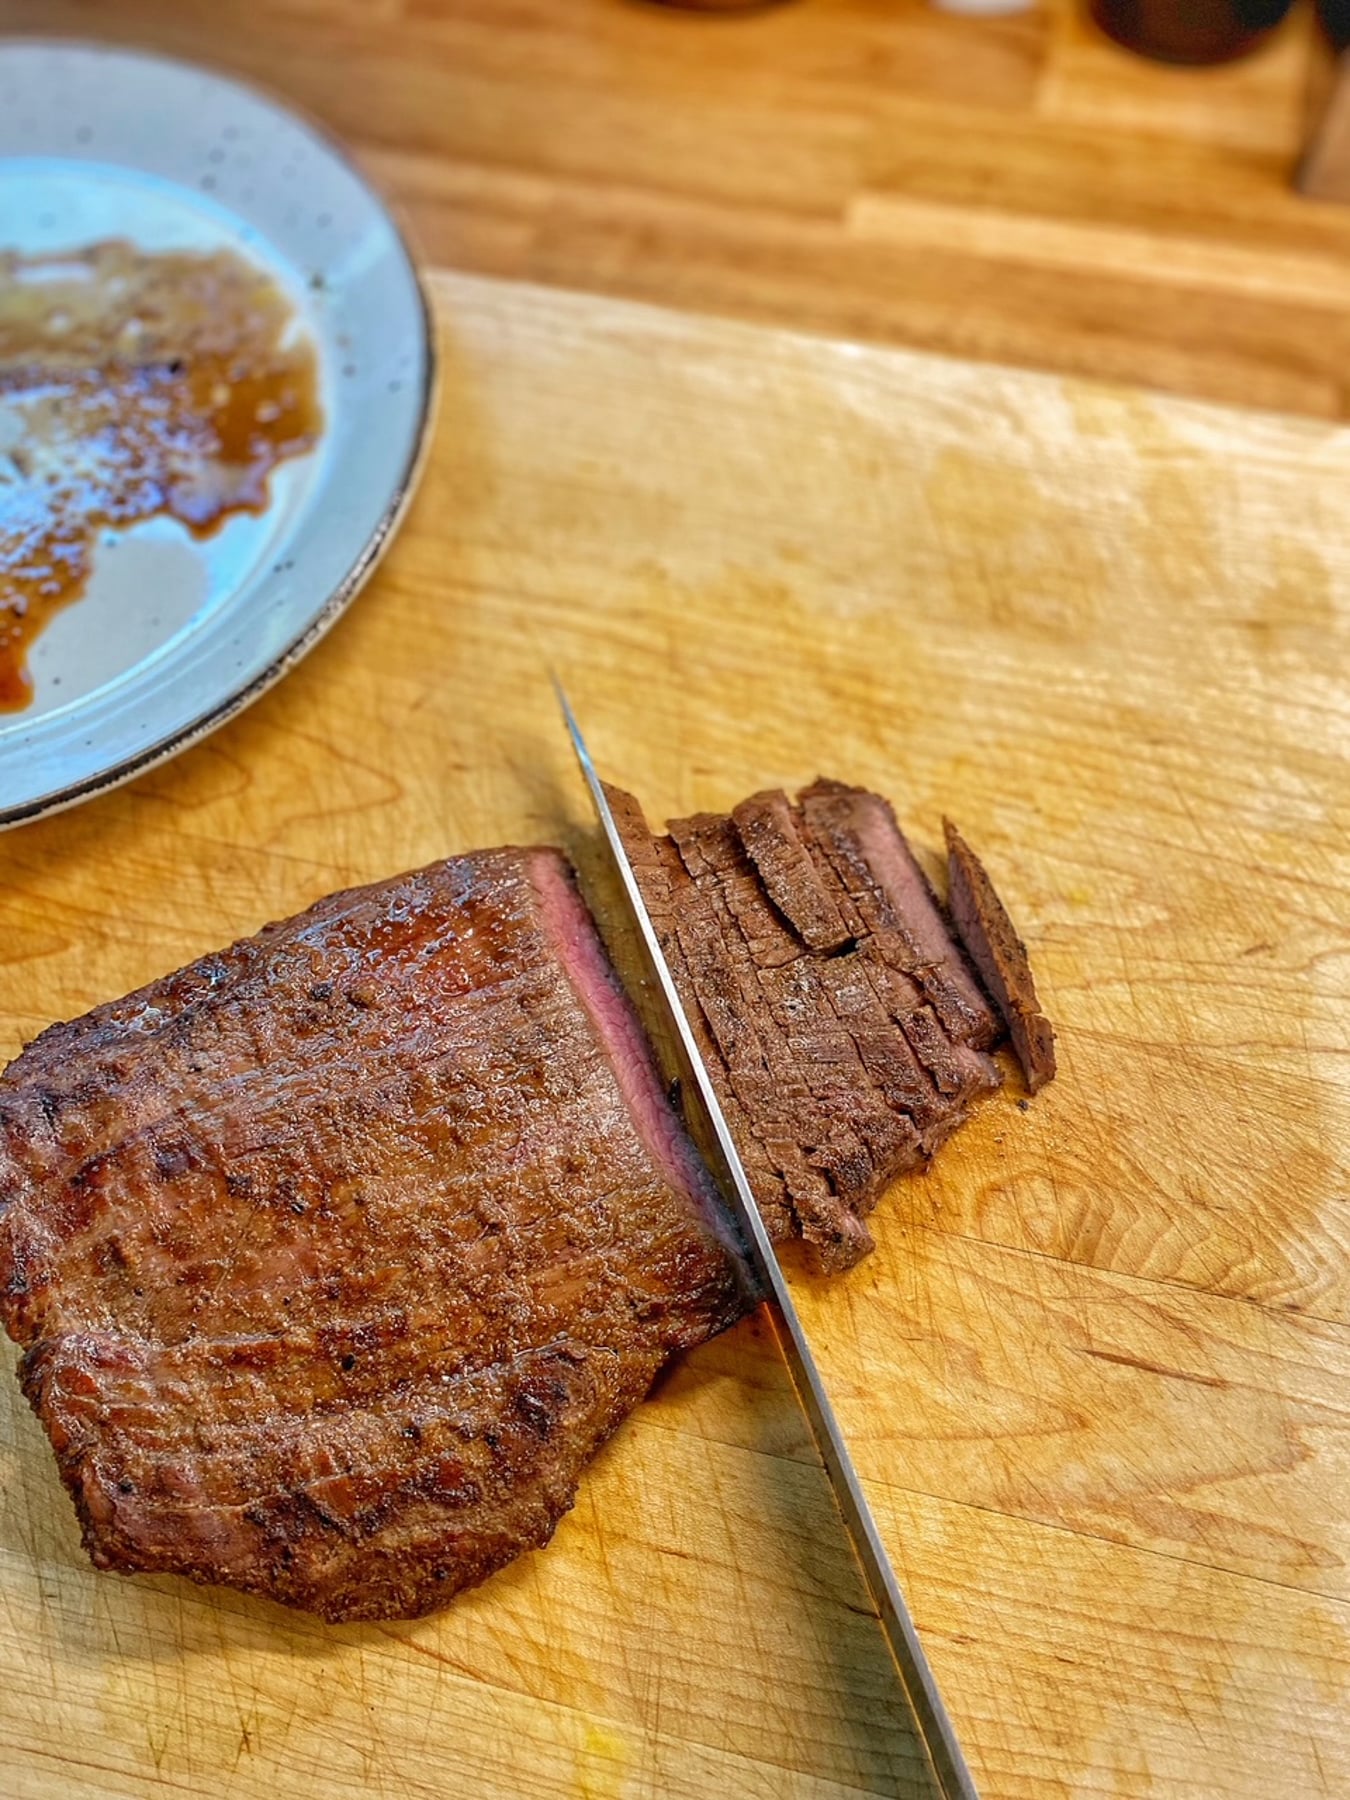 Cutting across the grain is the proper way to slice the cooked flank steak